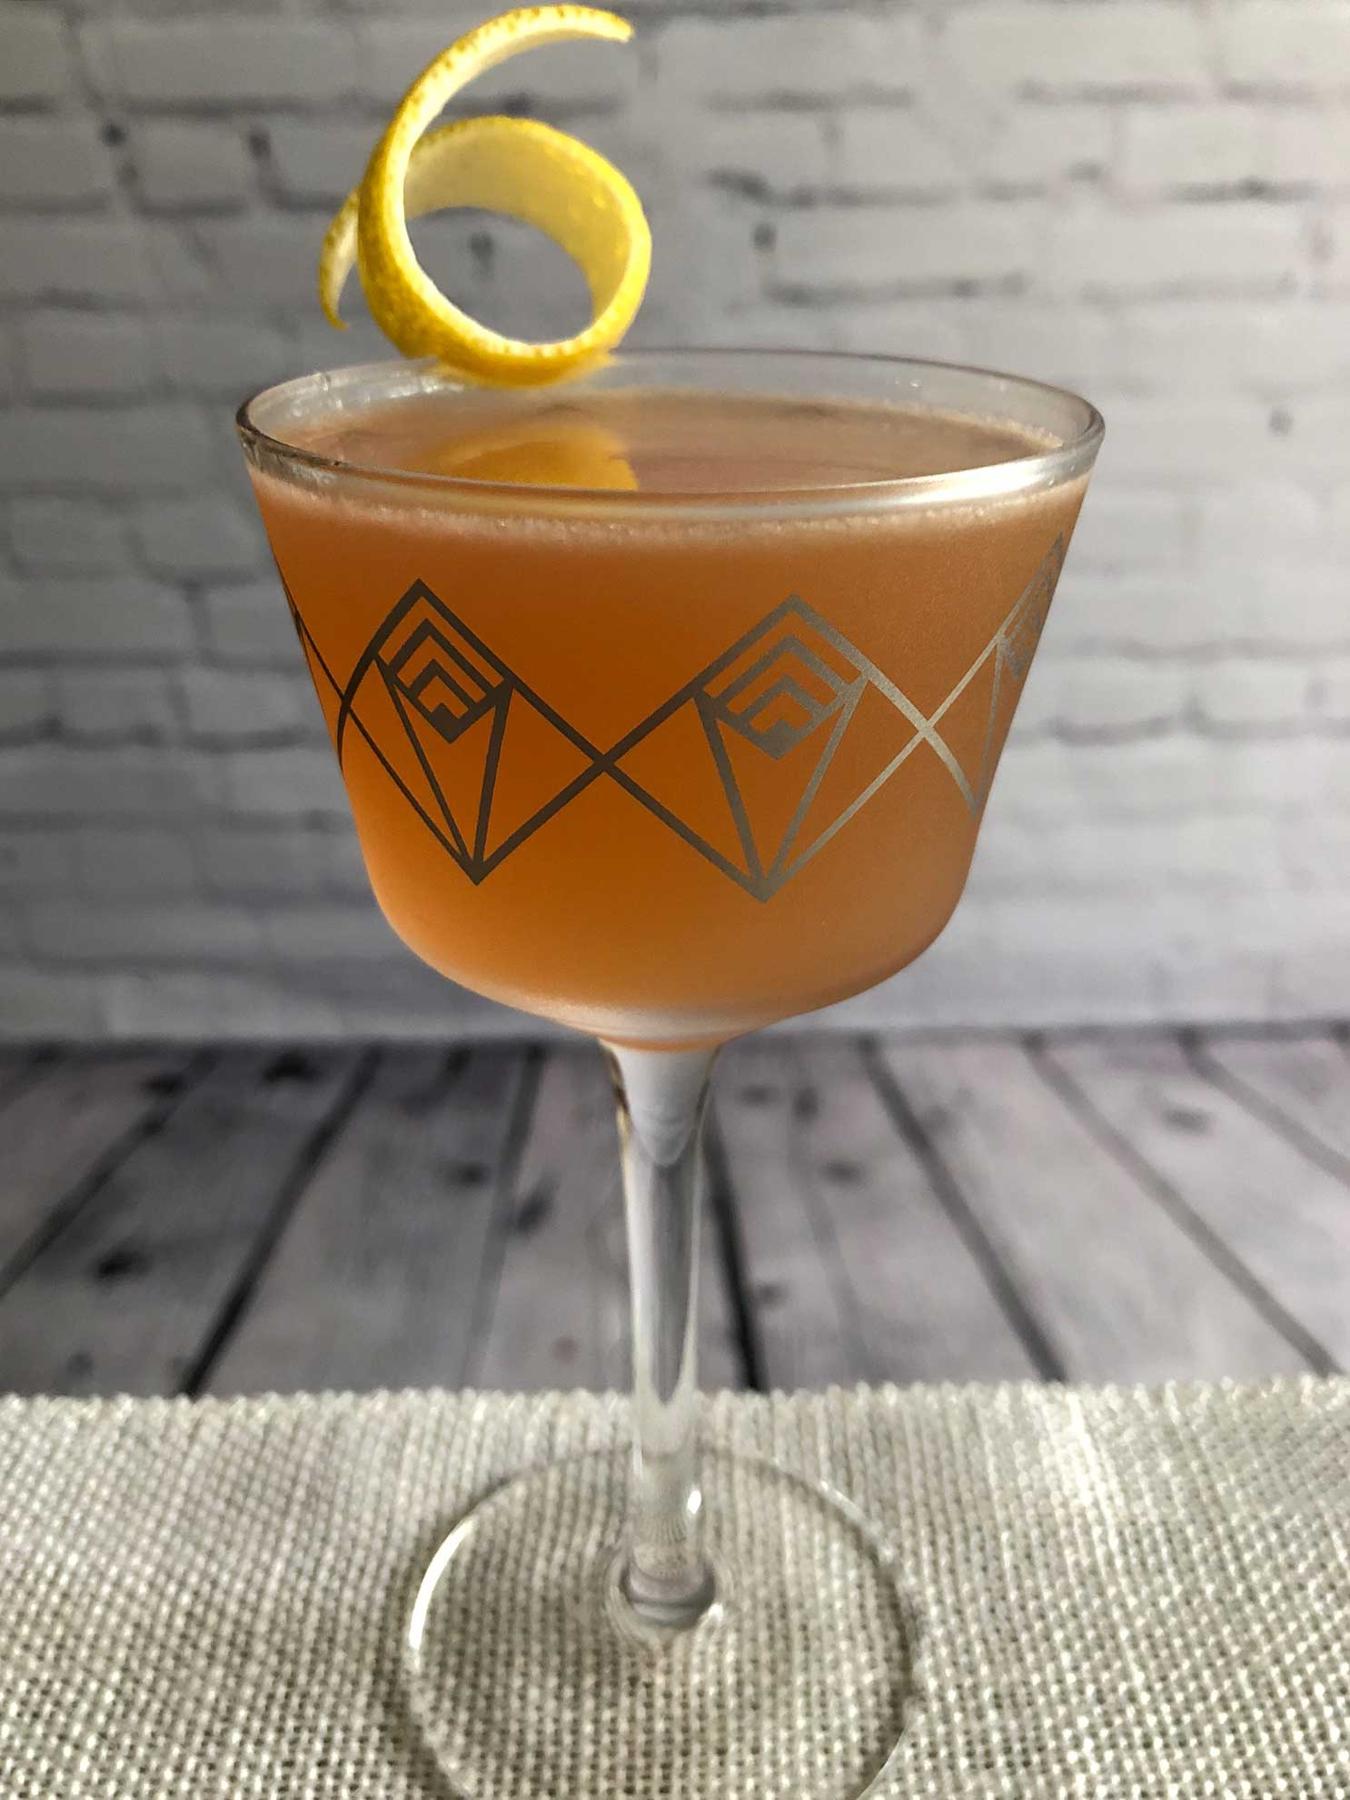 An example of the Jazz Flute, the mixed drink (drink), by riff on Gilchrist, PDT book, featuring scotch whisky, Purkhart Pear Williams Eau-de-Vie, pink grapefruit juice, Cardamaro Vino Amaro, simple syrup, grapefruit bitters, and lemon twist; photo by Lee Edwards